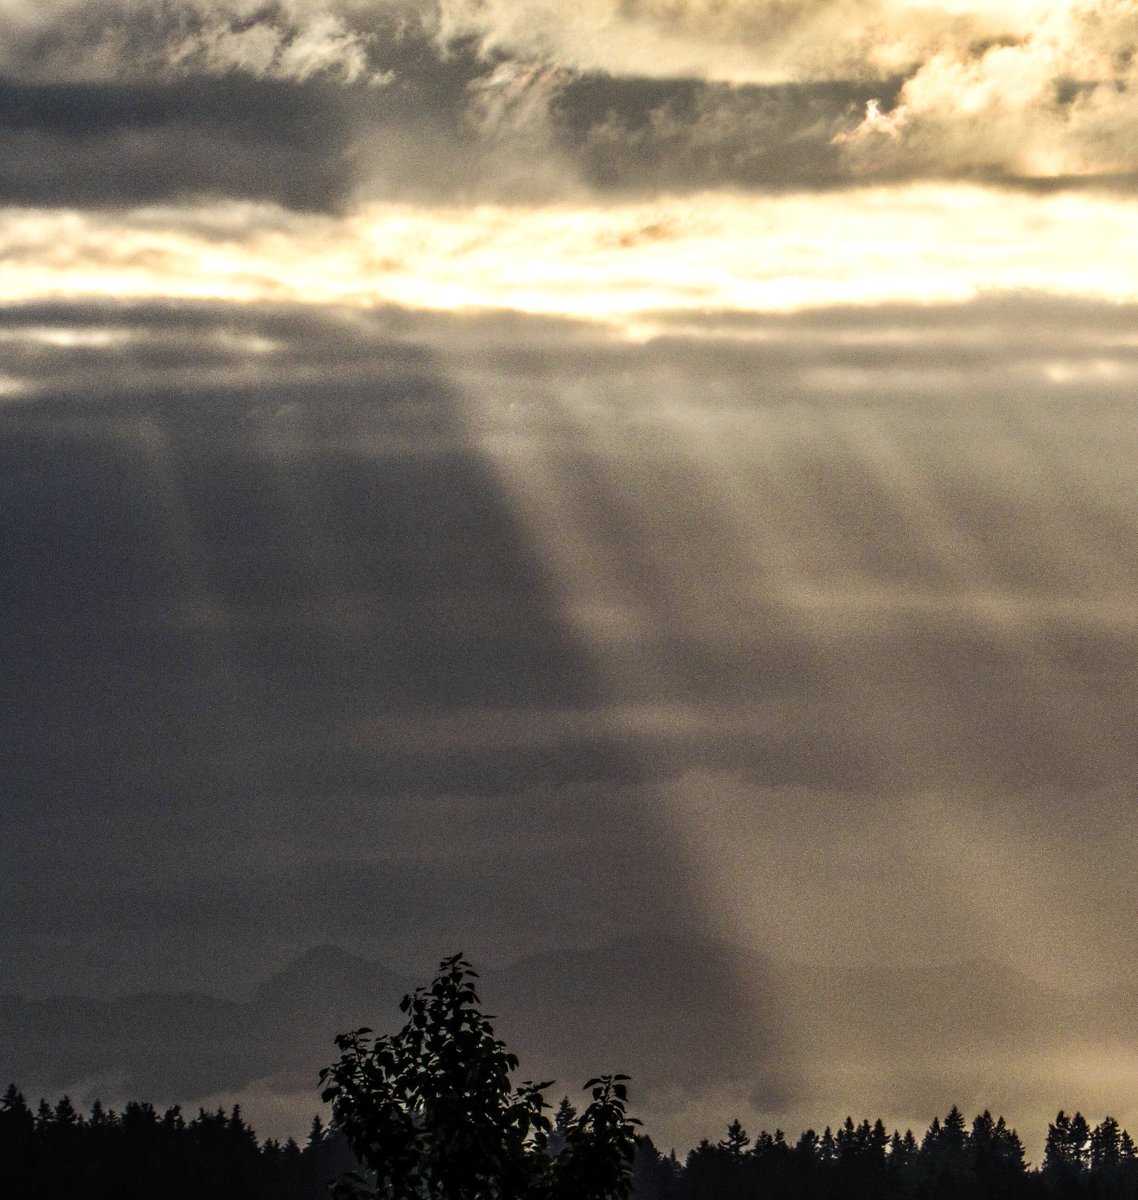 Looking east this morning, the 'spotlight' was shining on the Kirkland area. #wawx